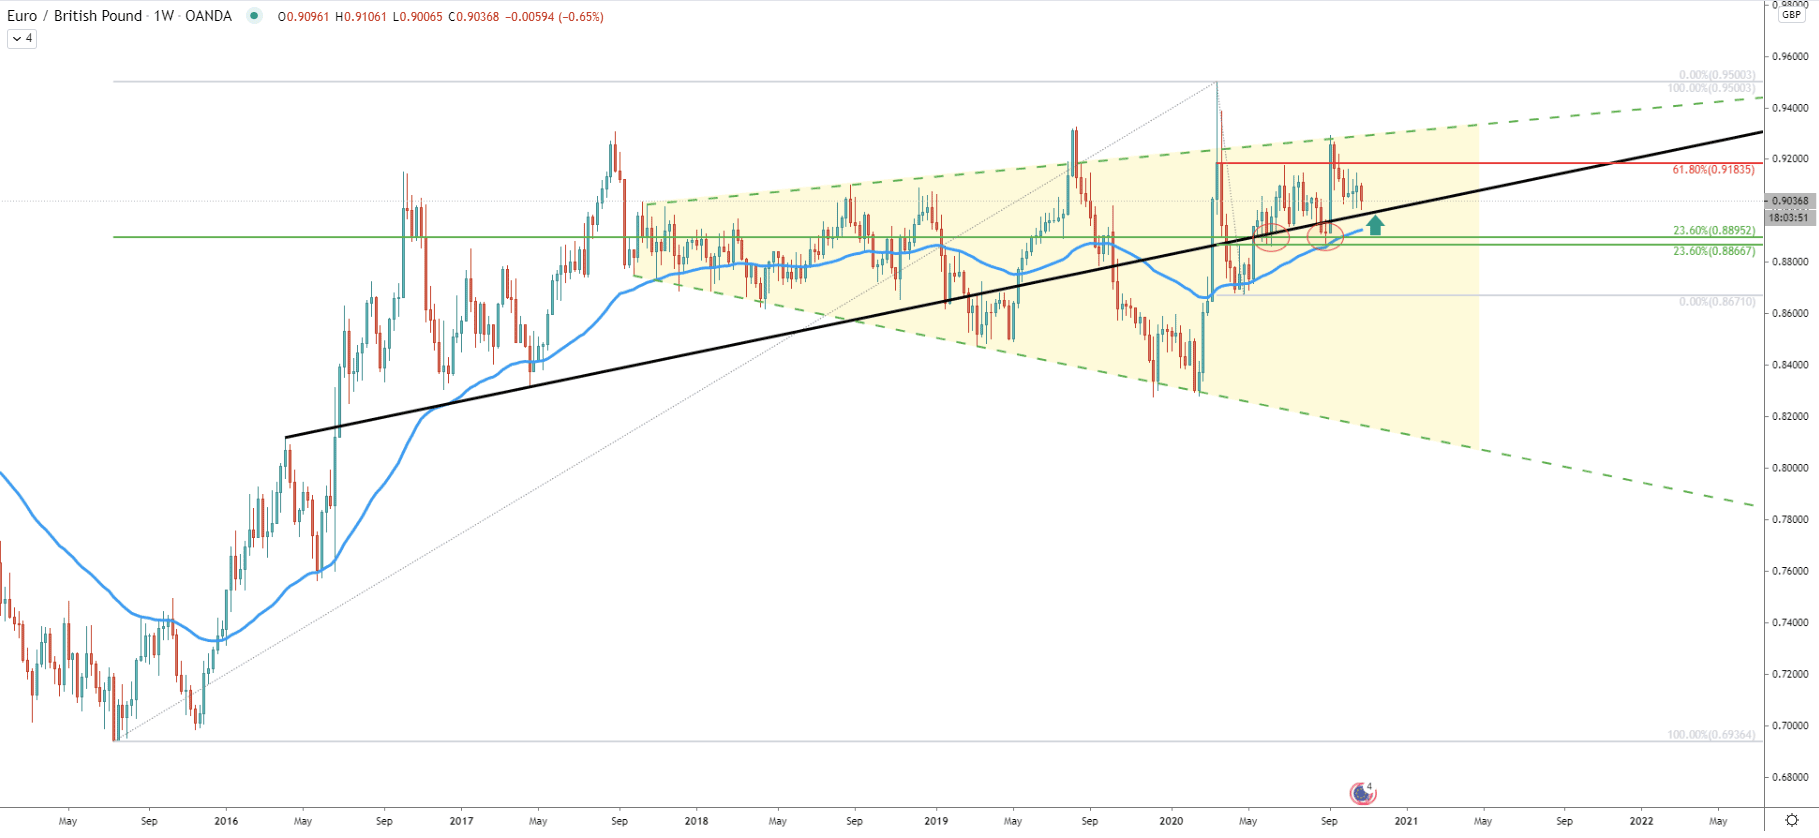 EUR/GBP Weekly Technical Analysis 30 Oct 2020